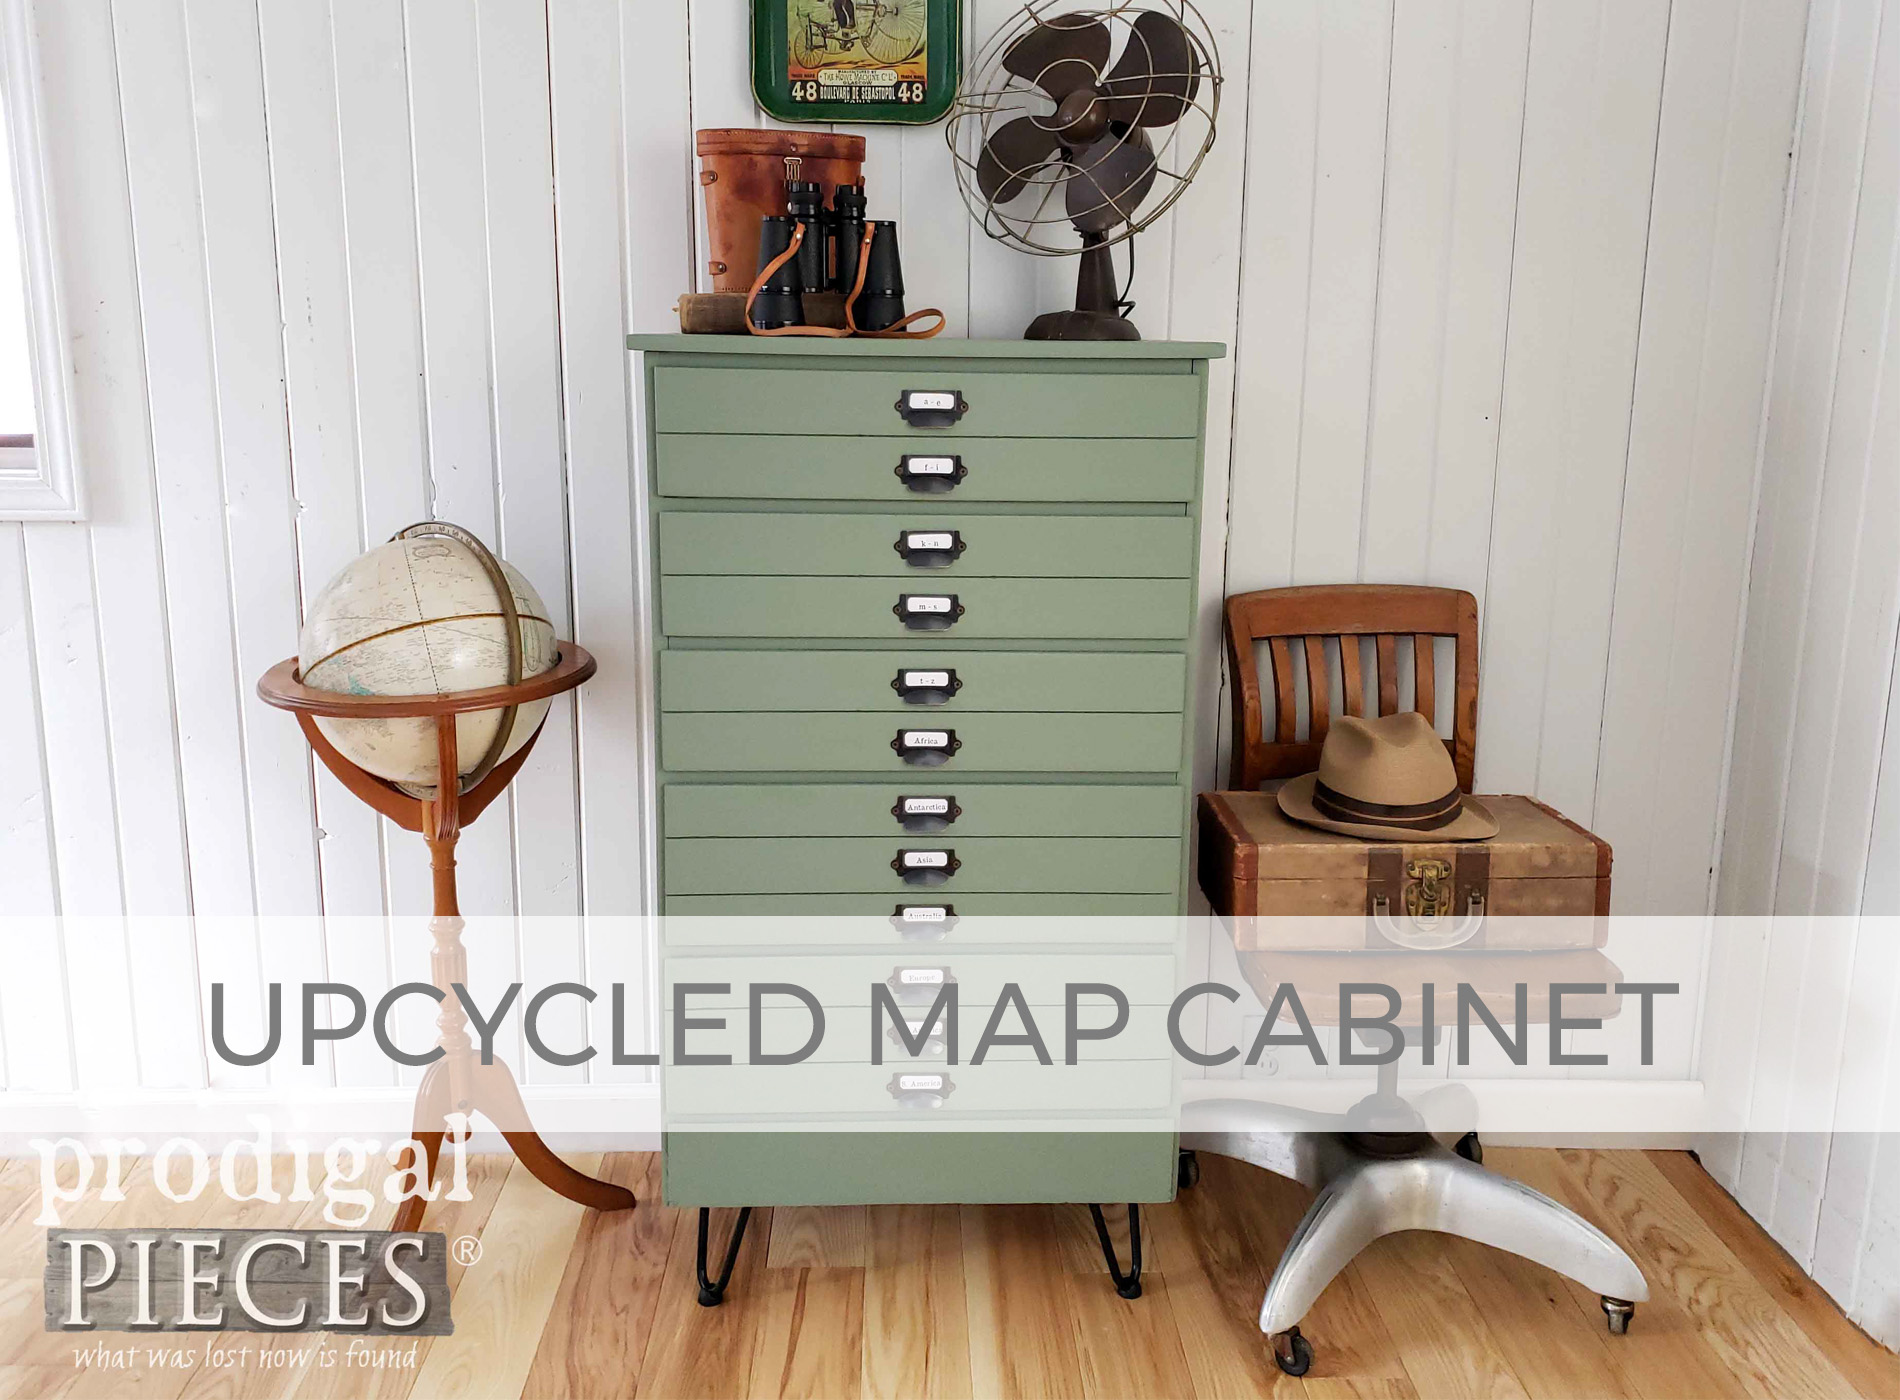 Upcycled Map Cabinet from Chest of Drawers by Larissa of Prodigal Pieces | prodigalpieces.com #prodigalpieces